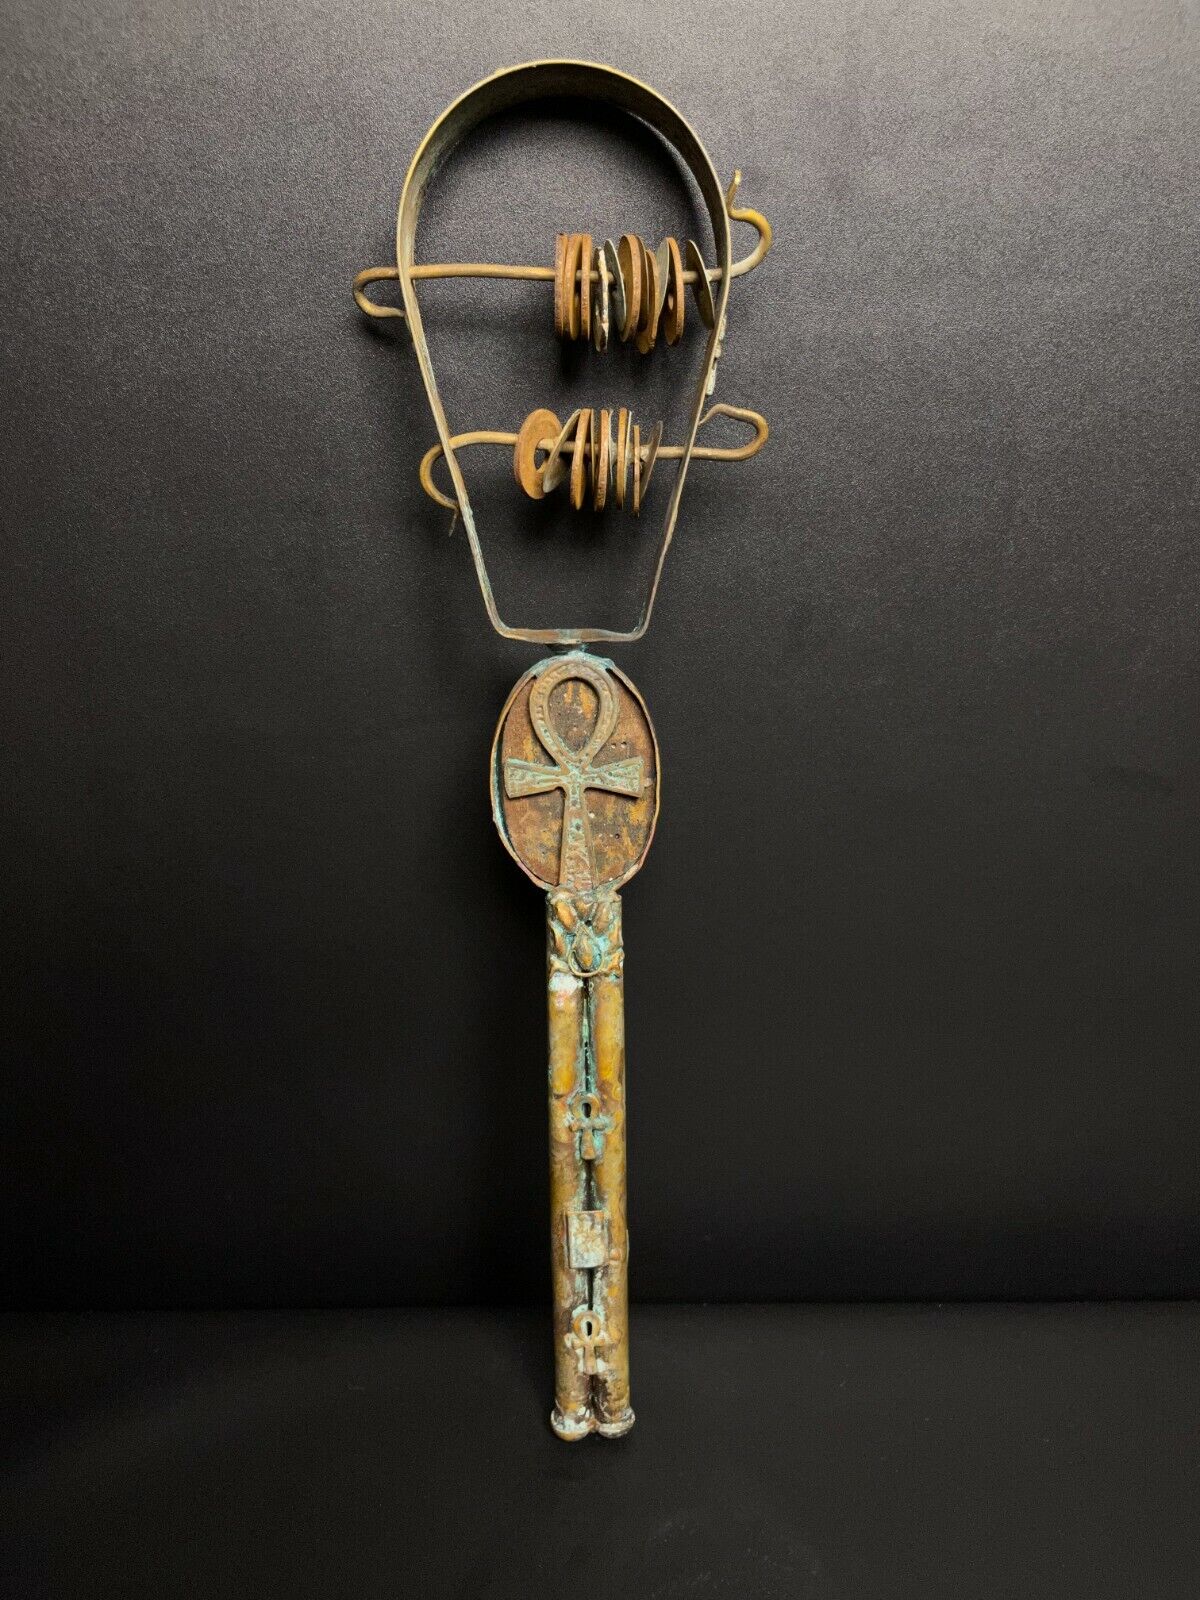 Egyptian Double face Sistrum (Musical Instrument) with The Egyptian Ankh &Scarab